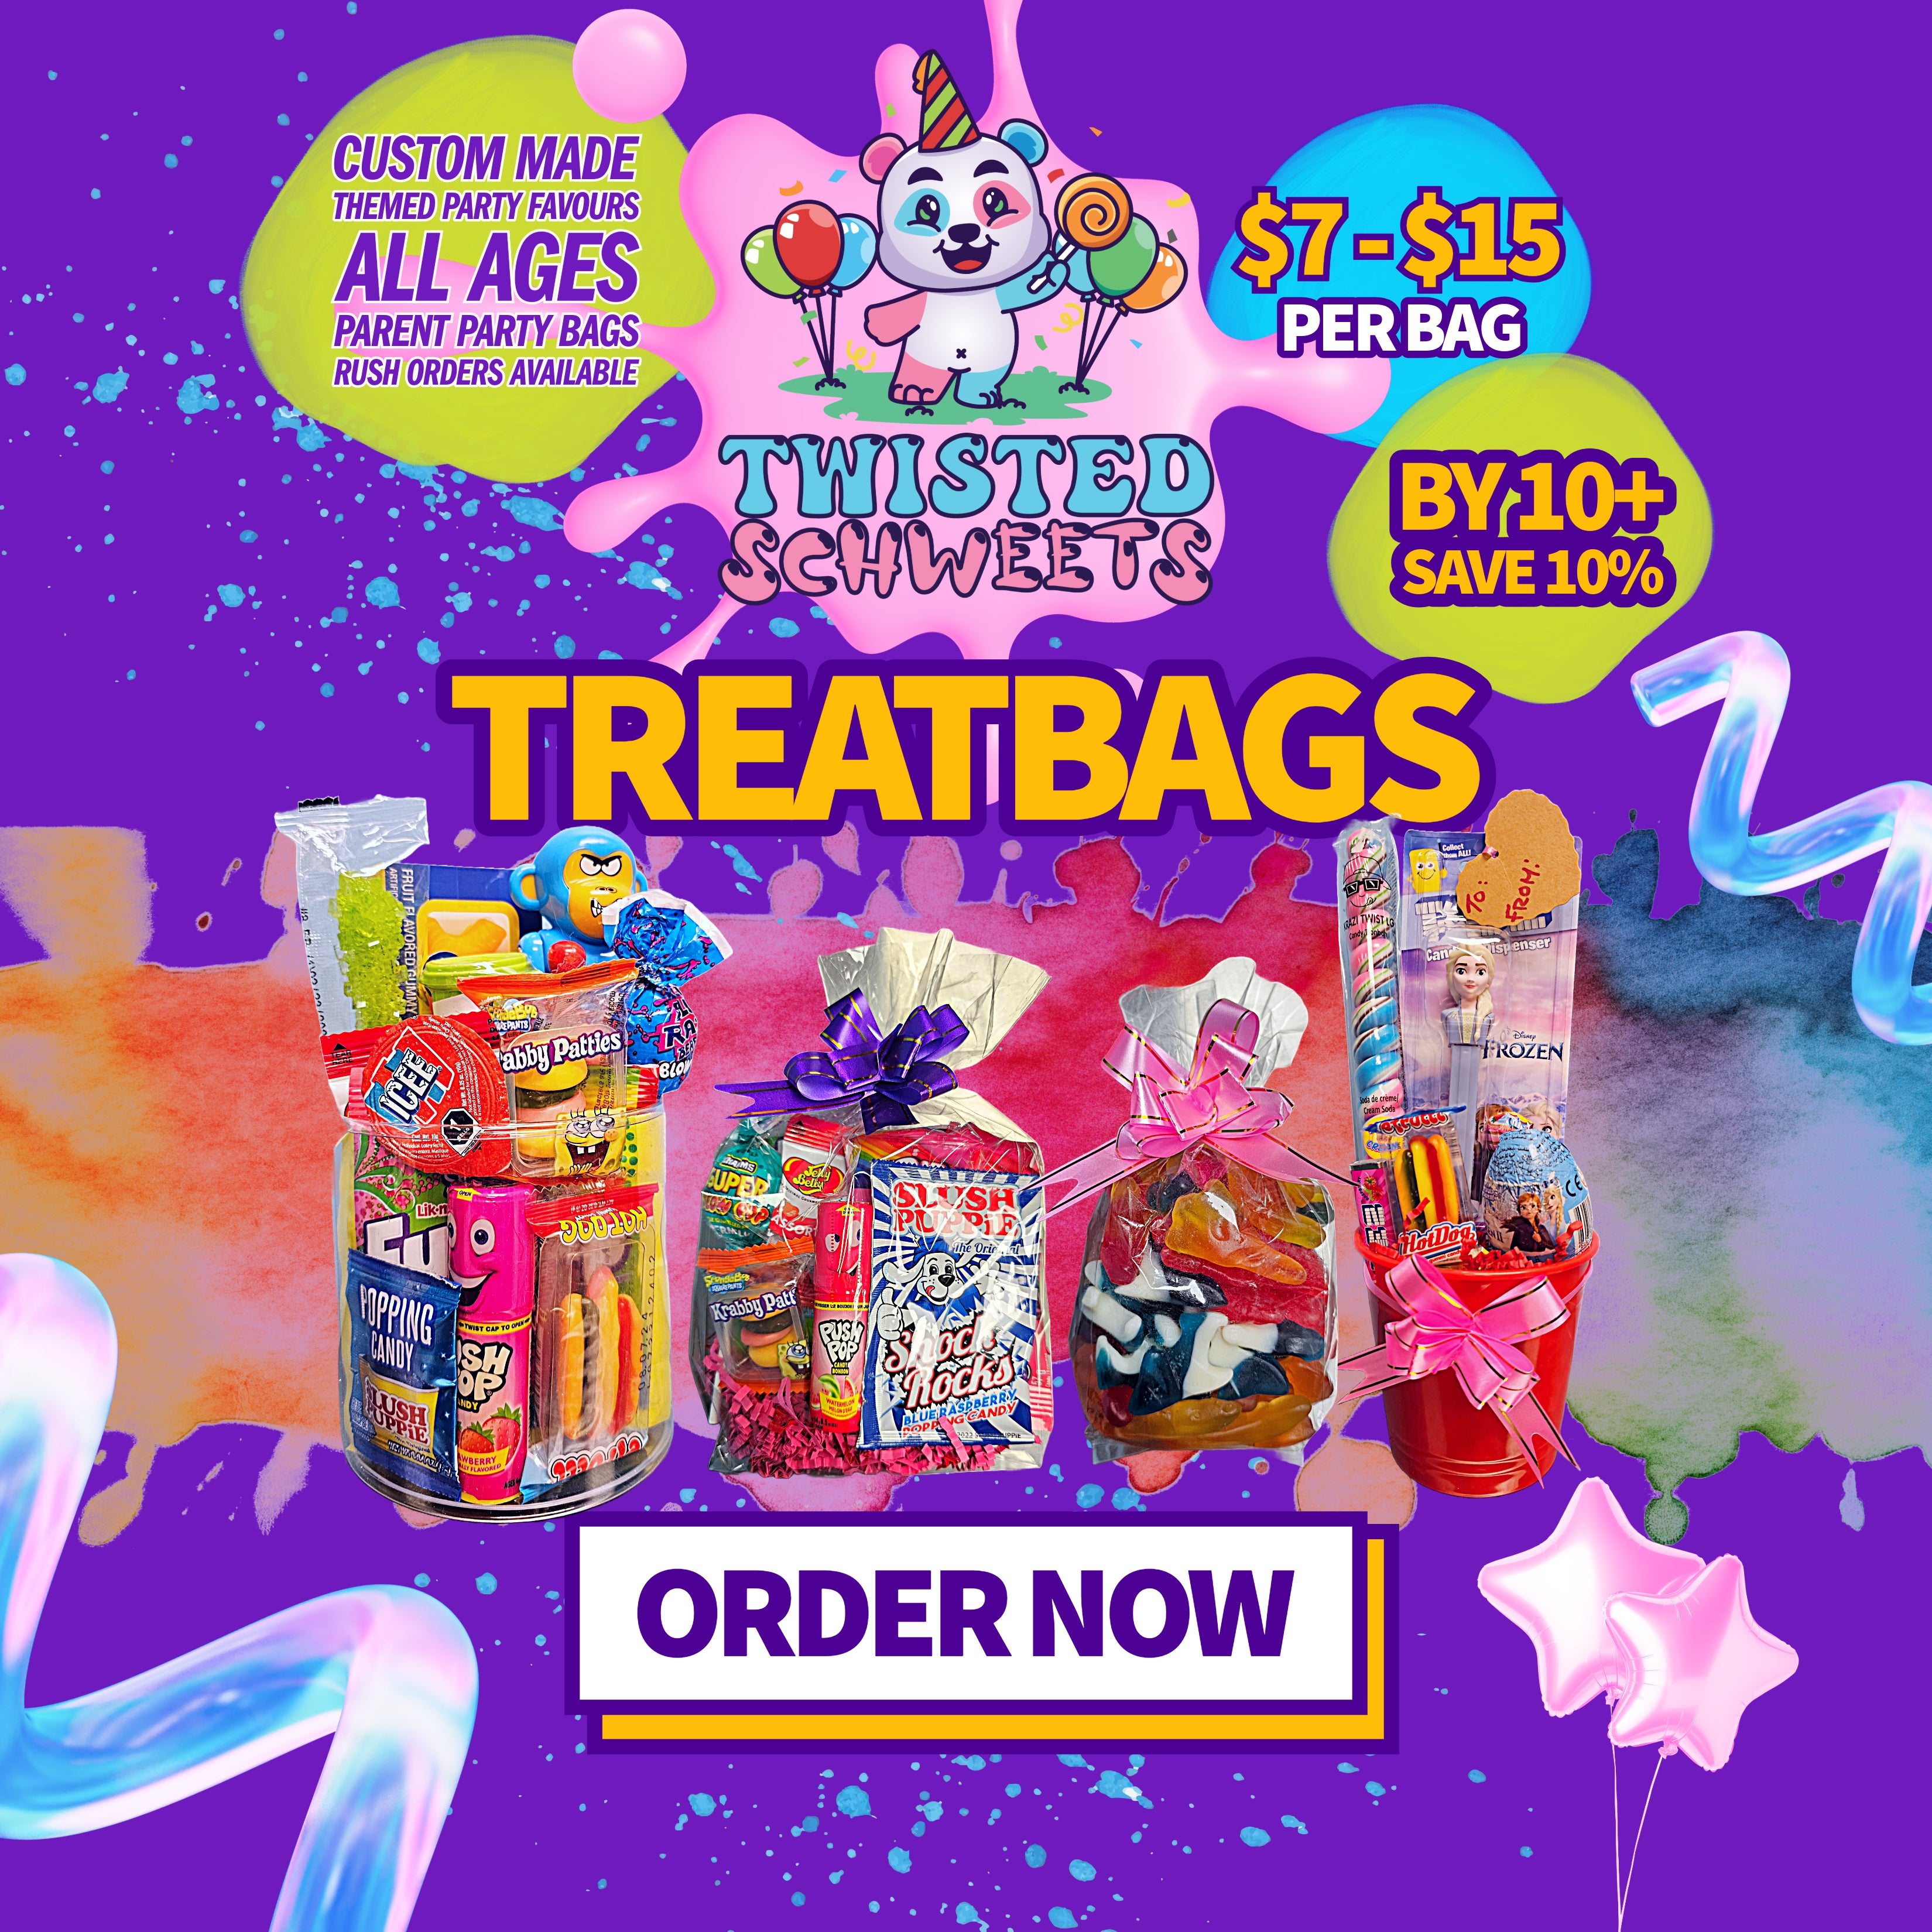 Kids Swag Bags - Loot Bags for Kids Parties - Premium Party Favours